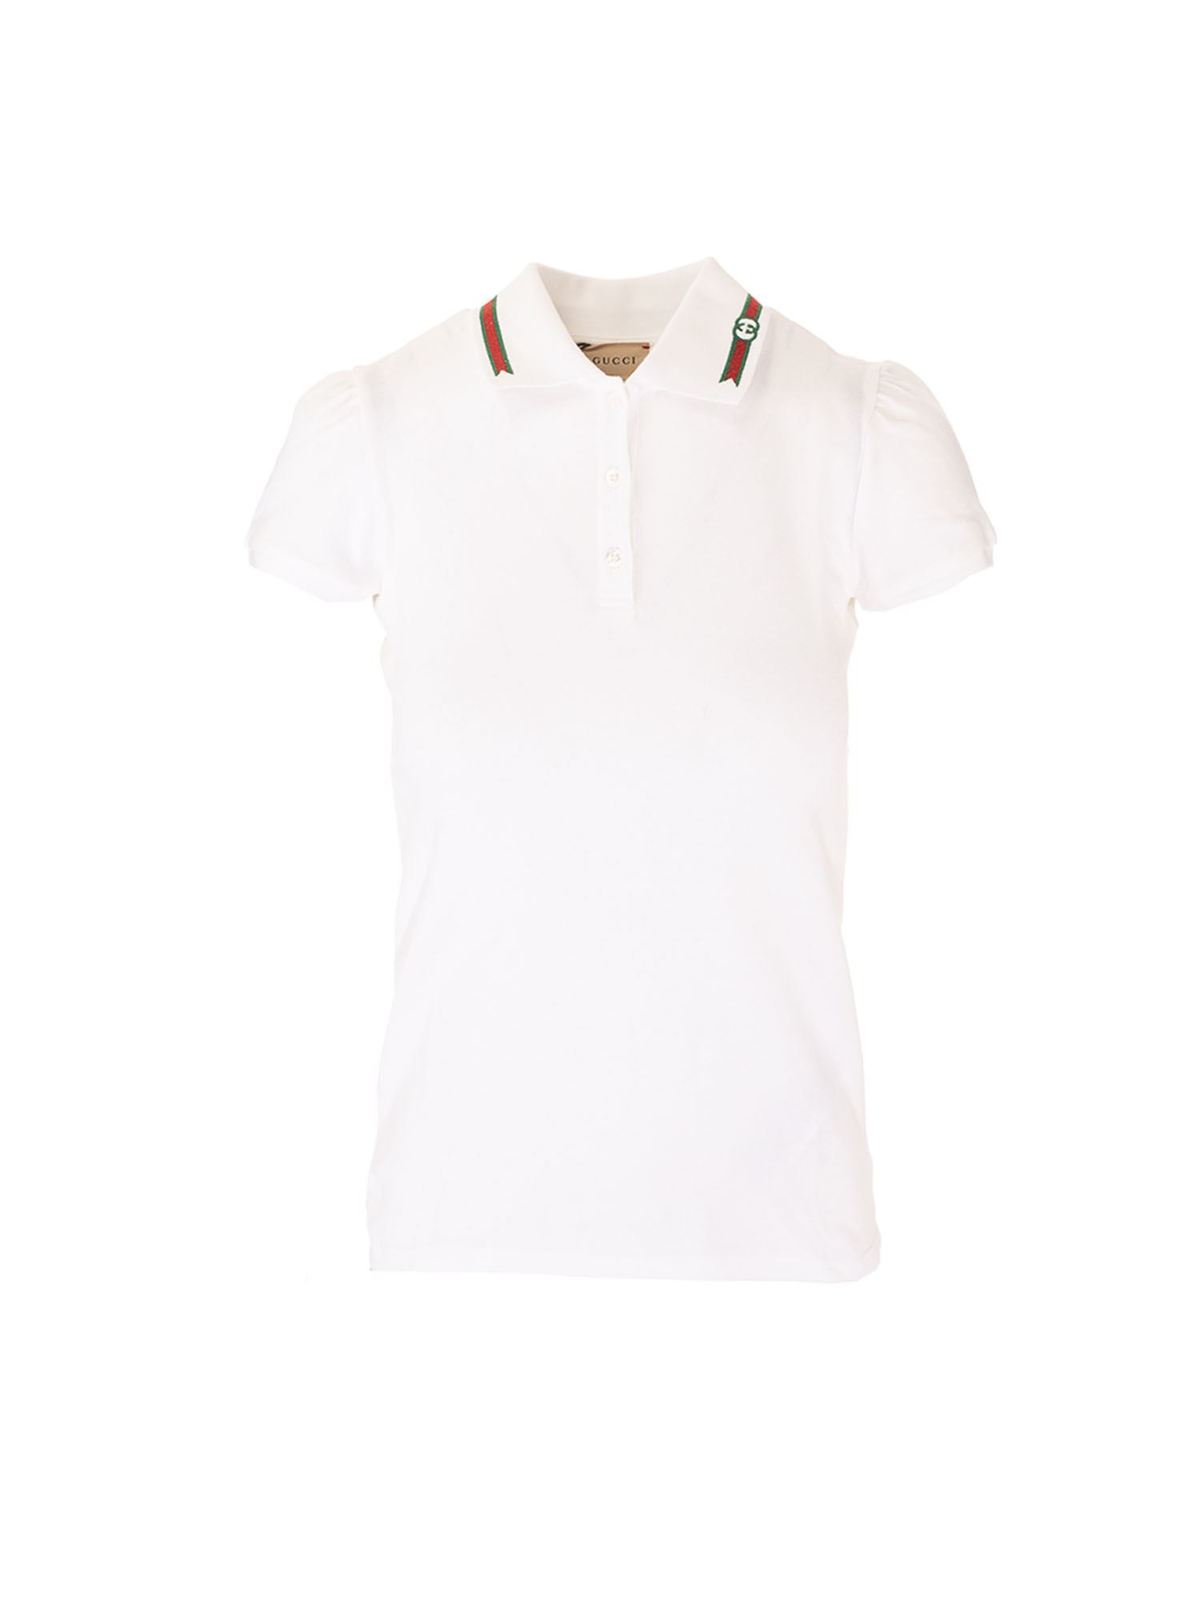 GUCCI COLLAR EMBROIDERY POLO SHIRT IN WHITE